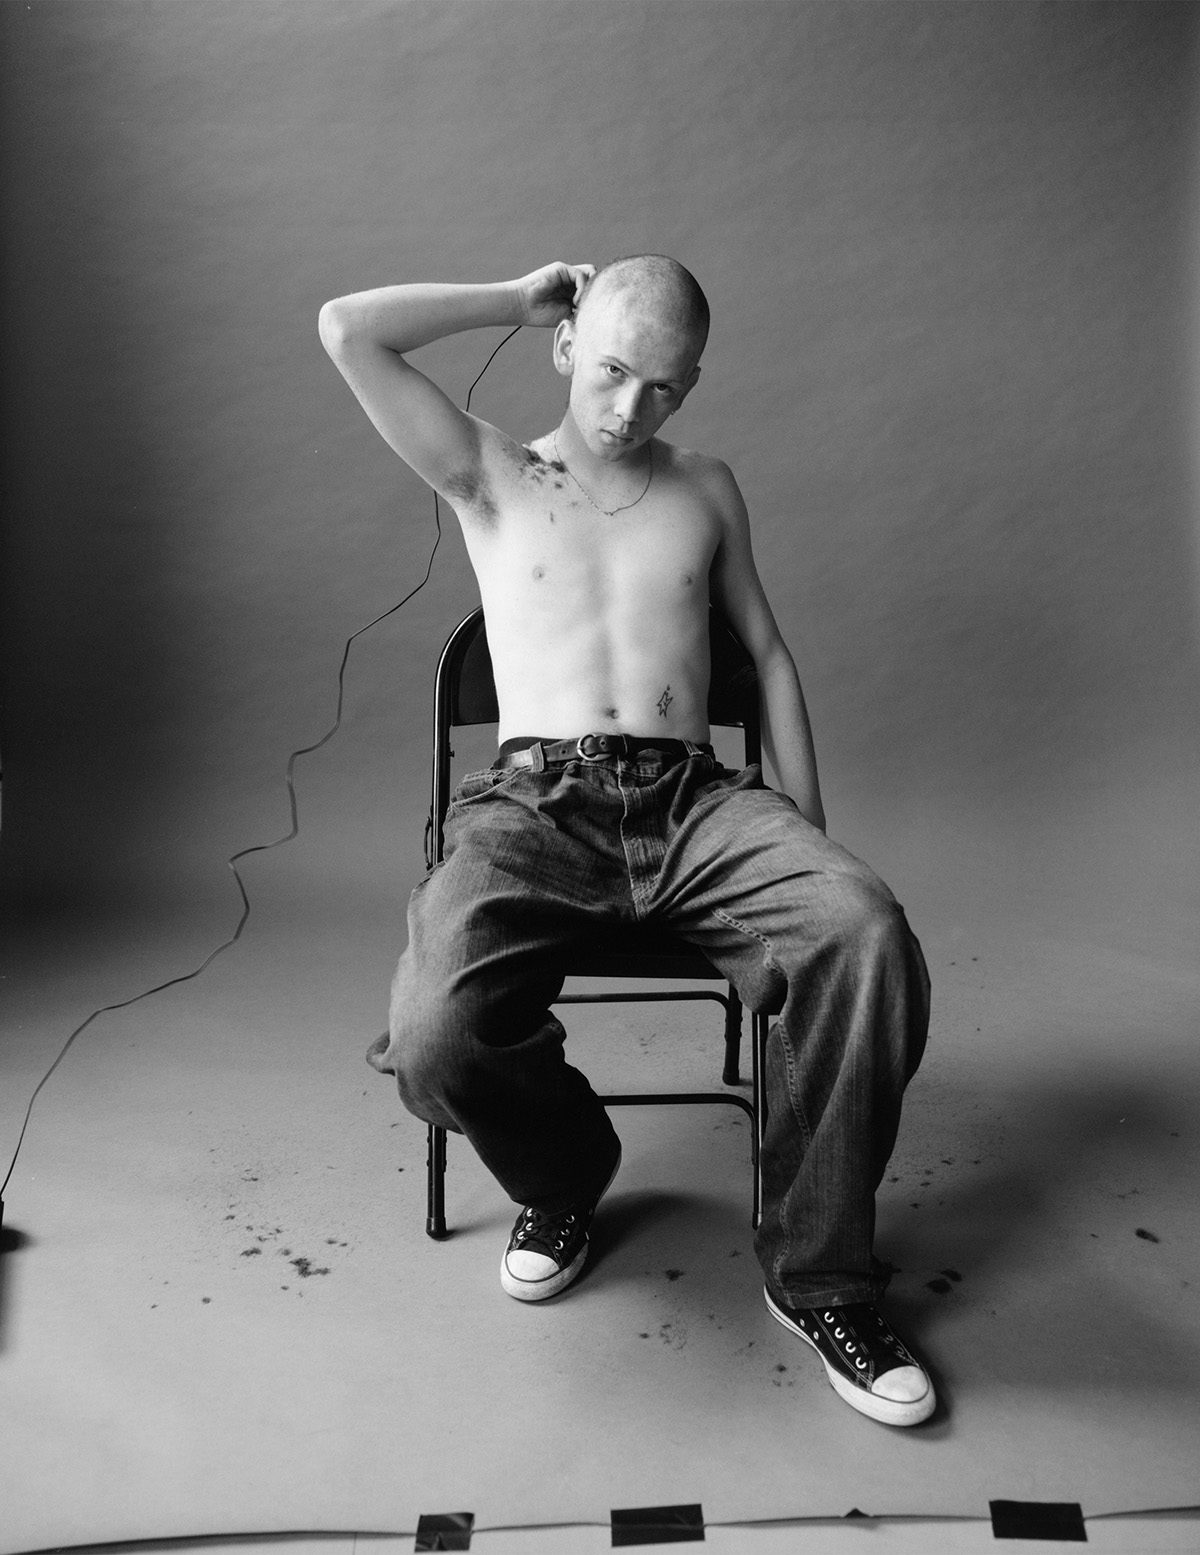 Black and white photo of a young person wearing jeans and trainers sat on a chair in a studio environment buzzing their hair